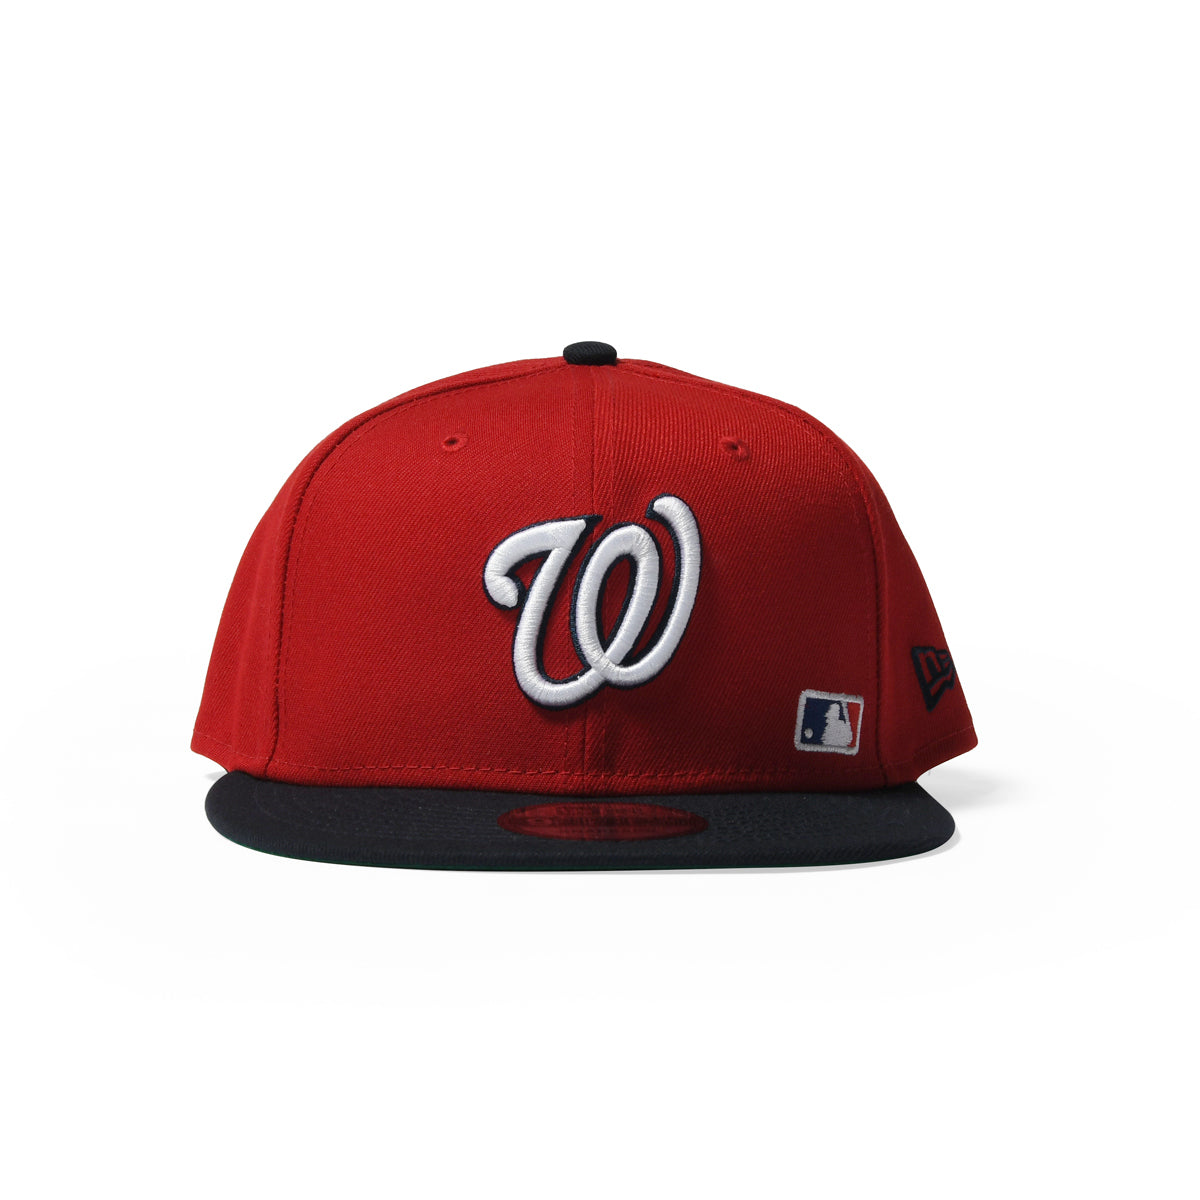 NEW ERA BlackLETTER ARCH WAS NATIONALS 9FIFTY